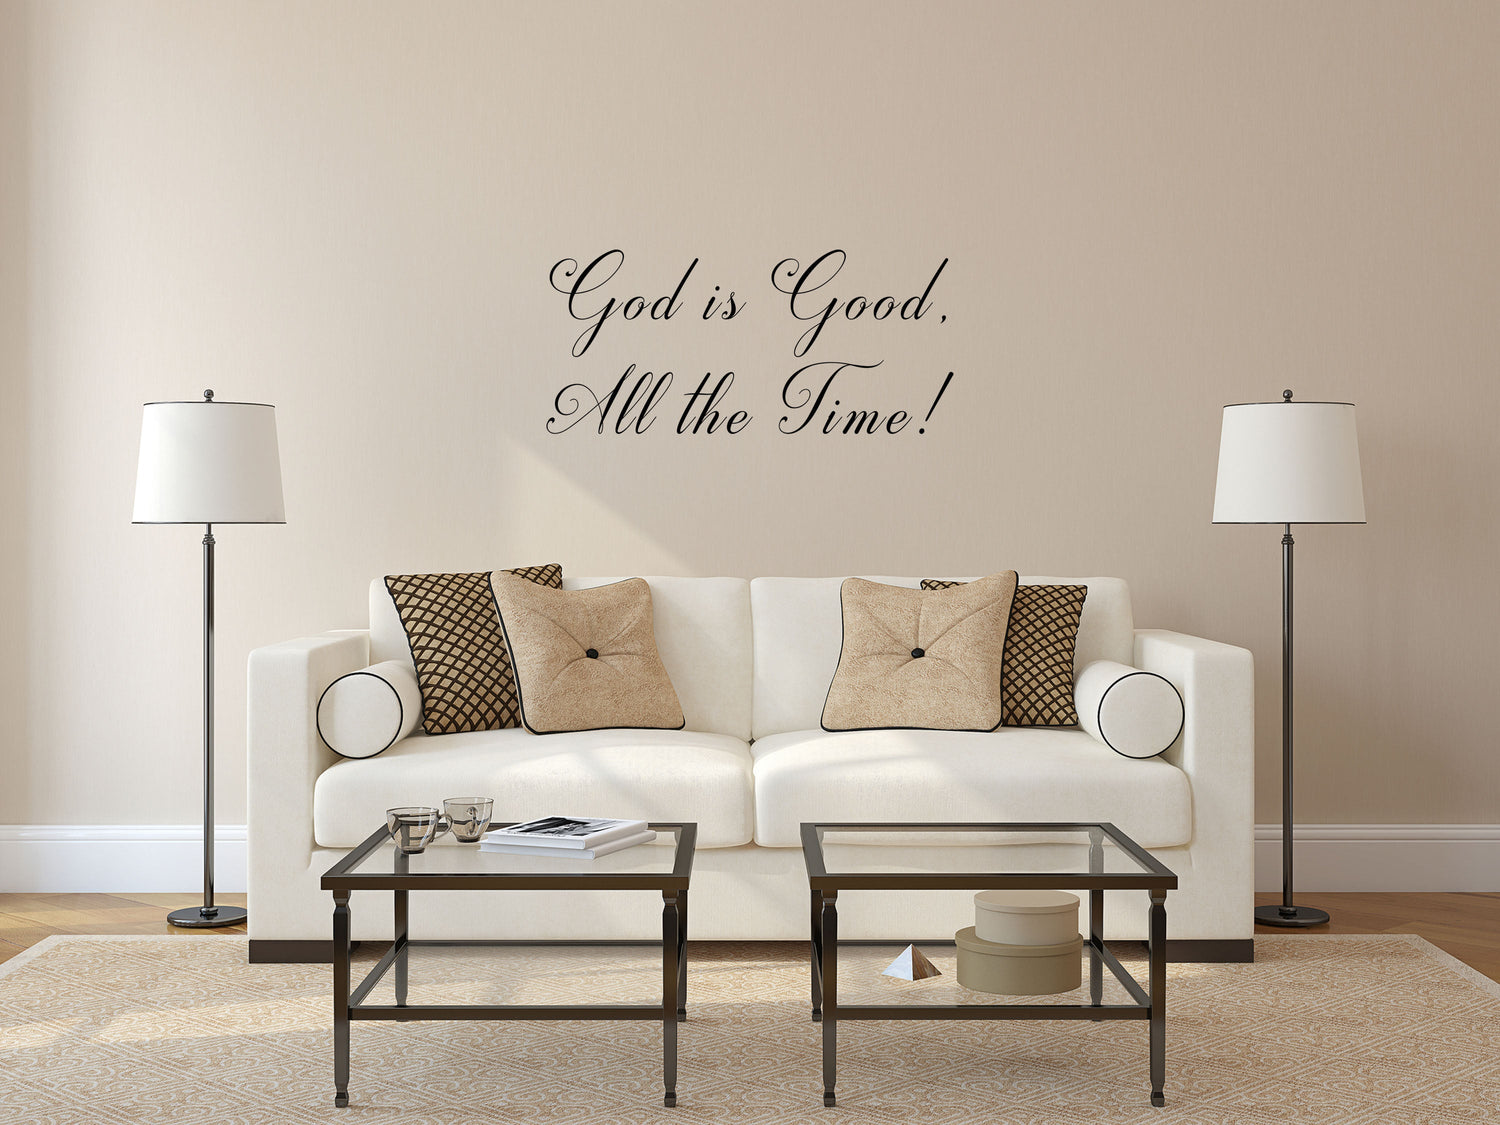 God Is Good All The Time - Handmade Wall Art Vinyl Wall Decal Inspirational Wall Signs 